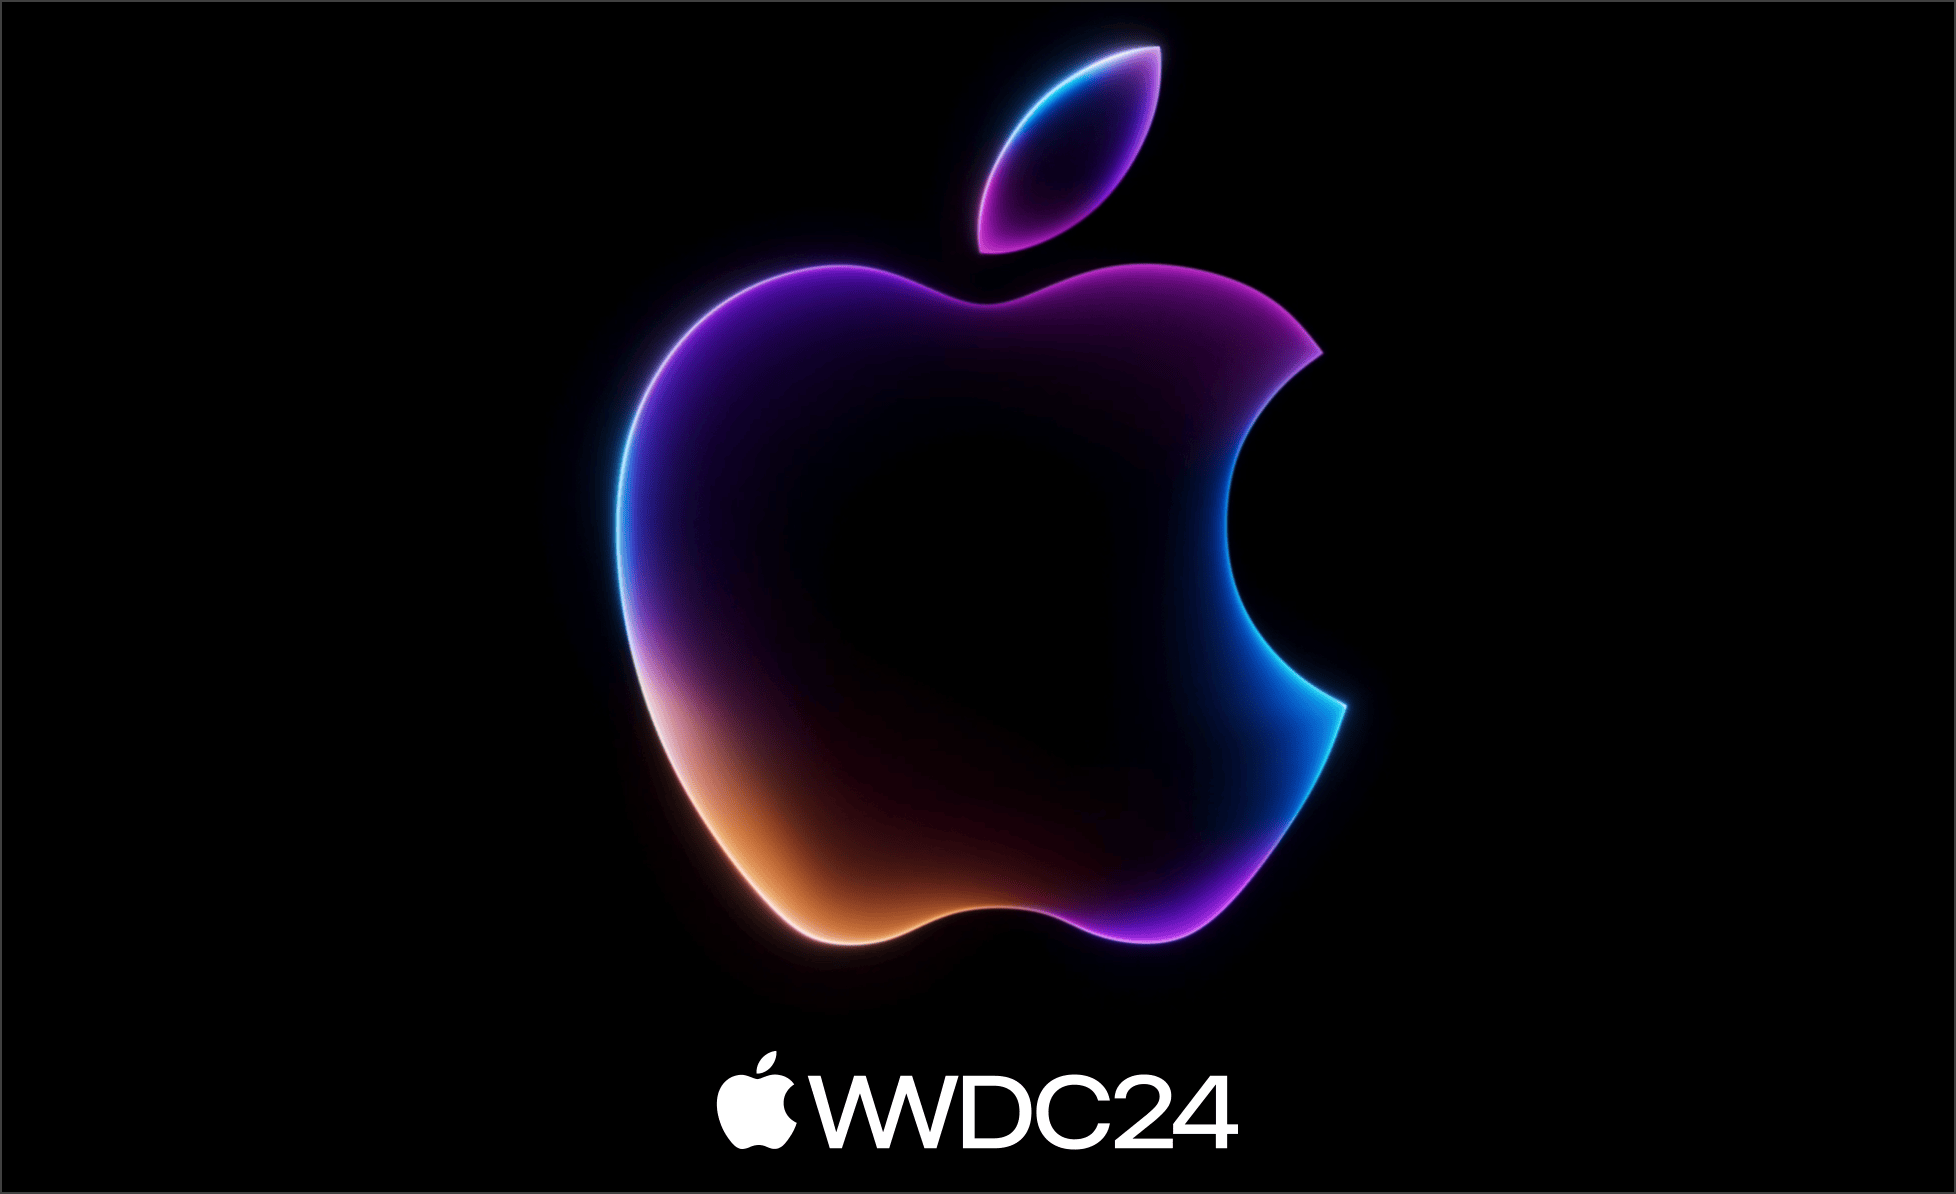 Apple logo for this year’s WWDC edition.